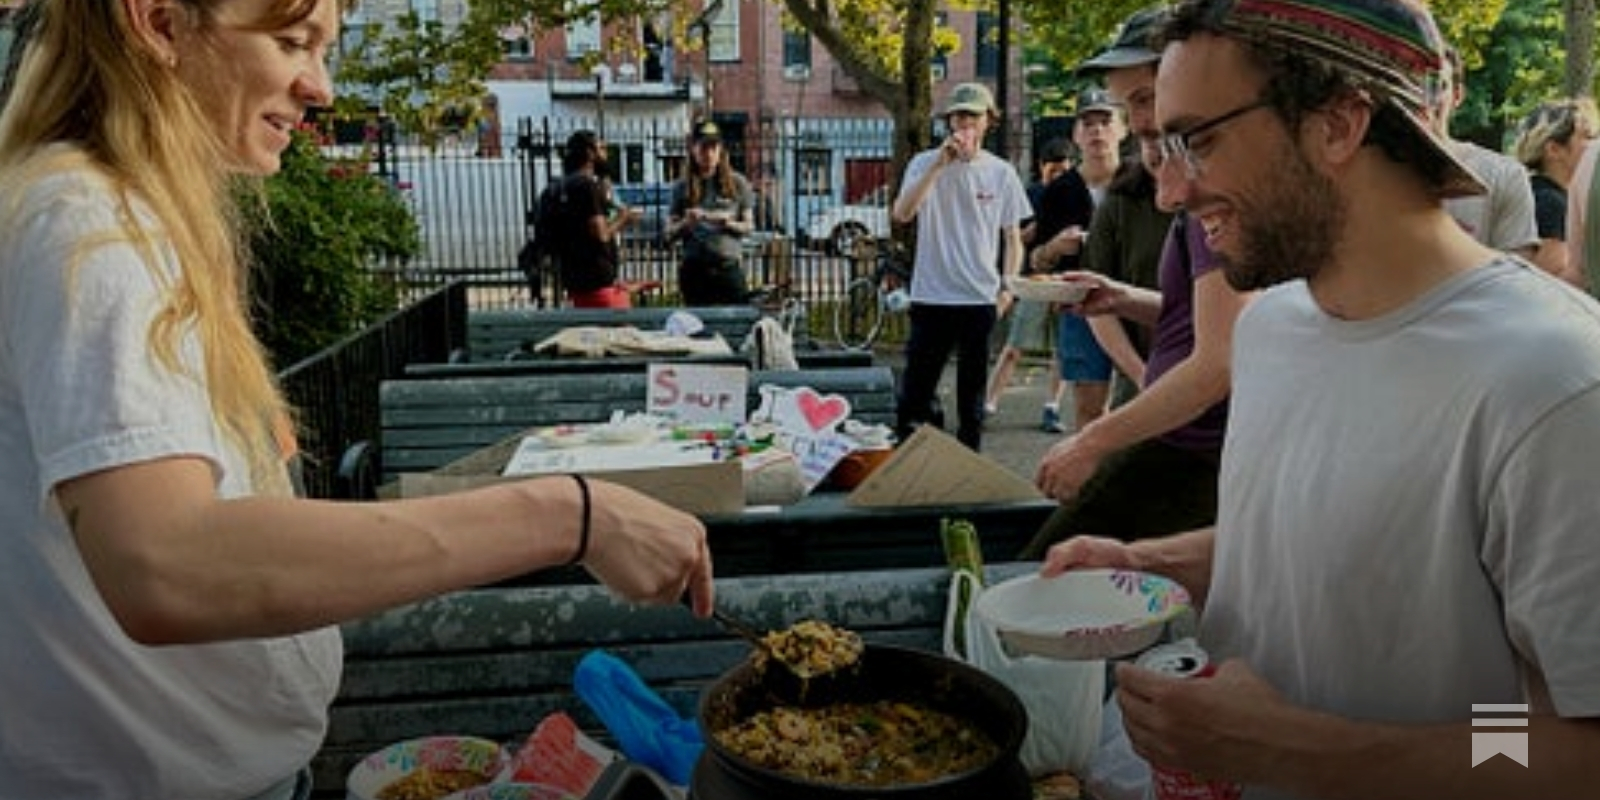 The Perpertual Stew Party Taking Over a Bushwick Playground